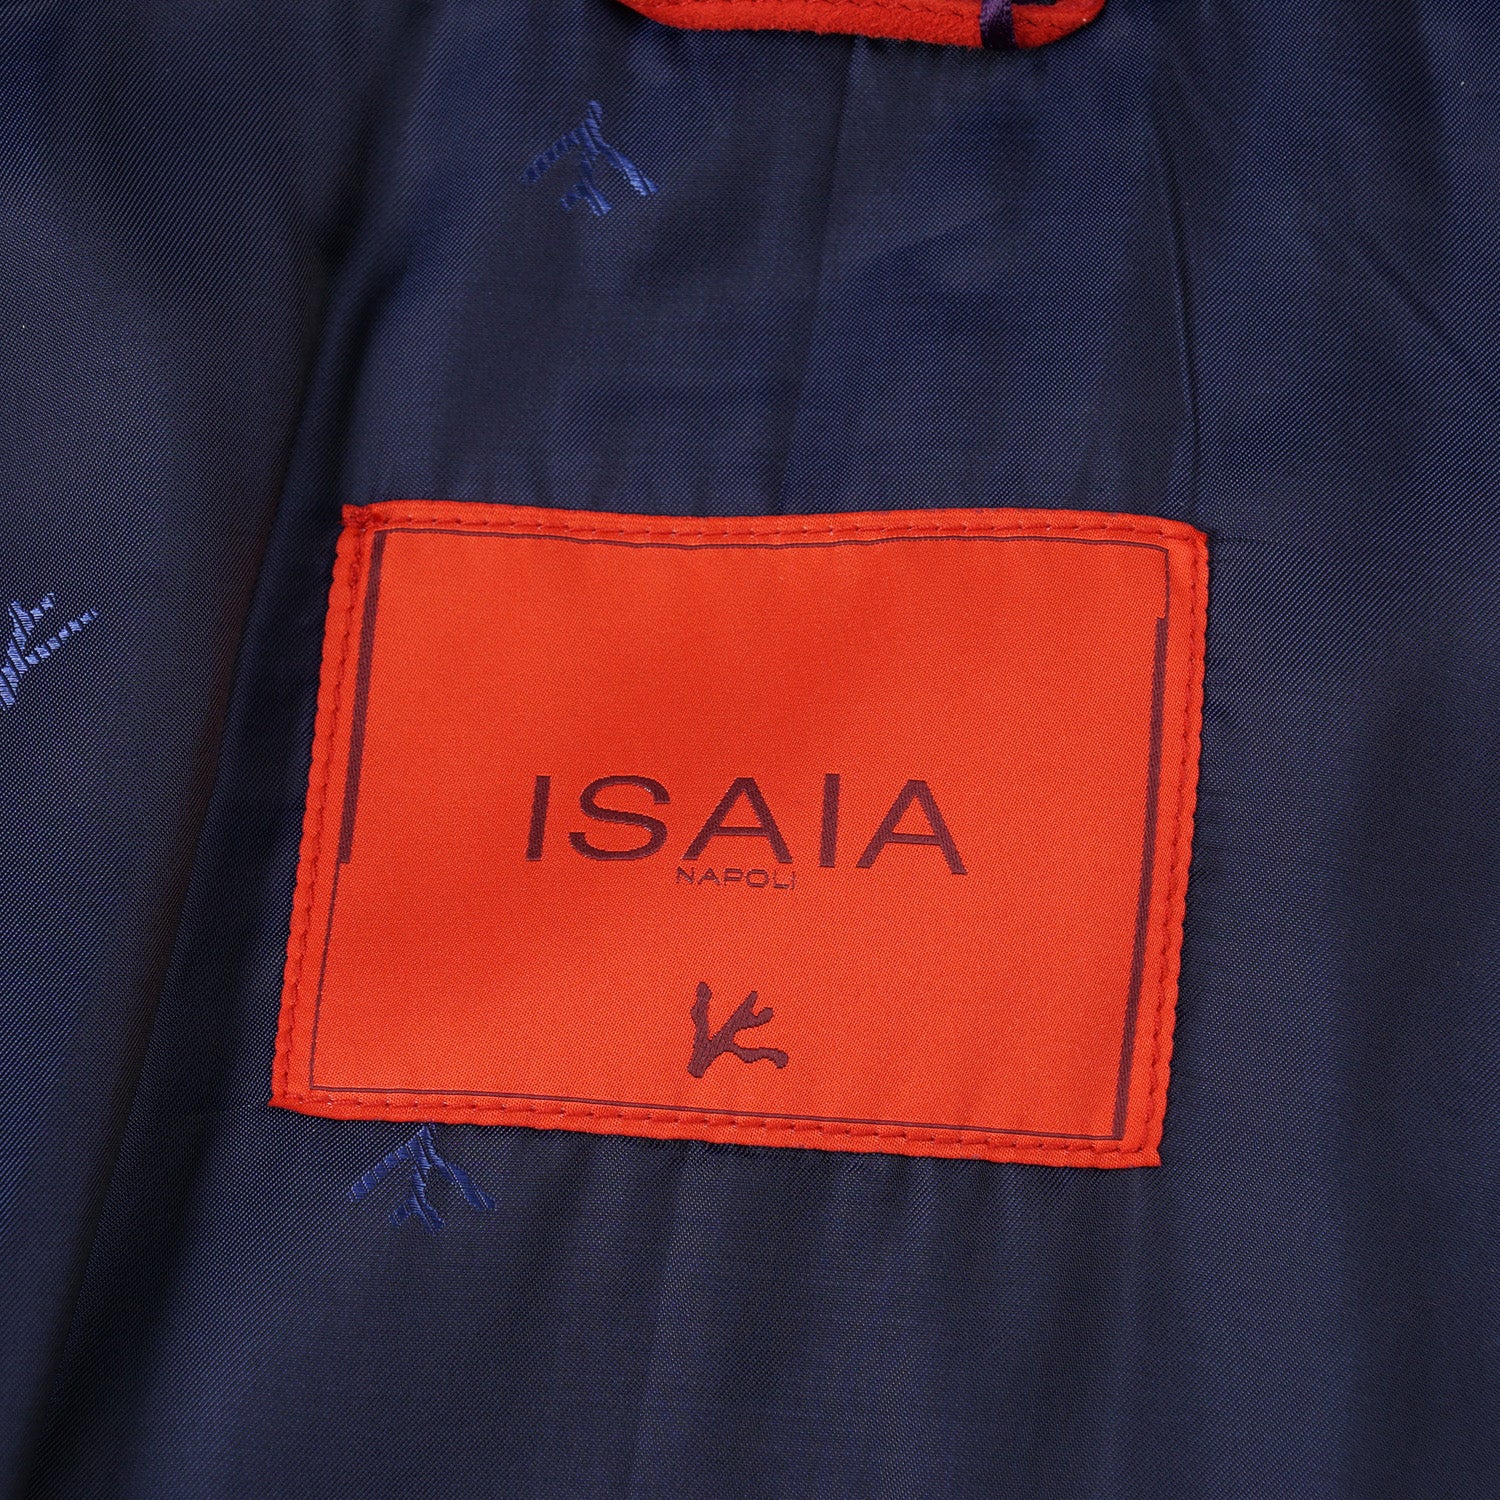 Isaia Leather Utility Jacket in Navy Blue - Top Shelf Apparel